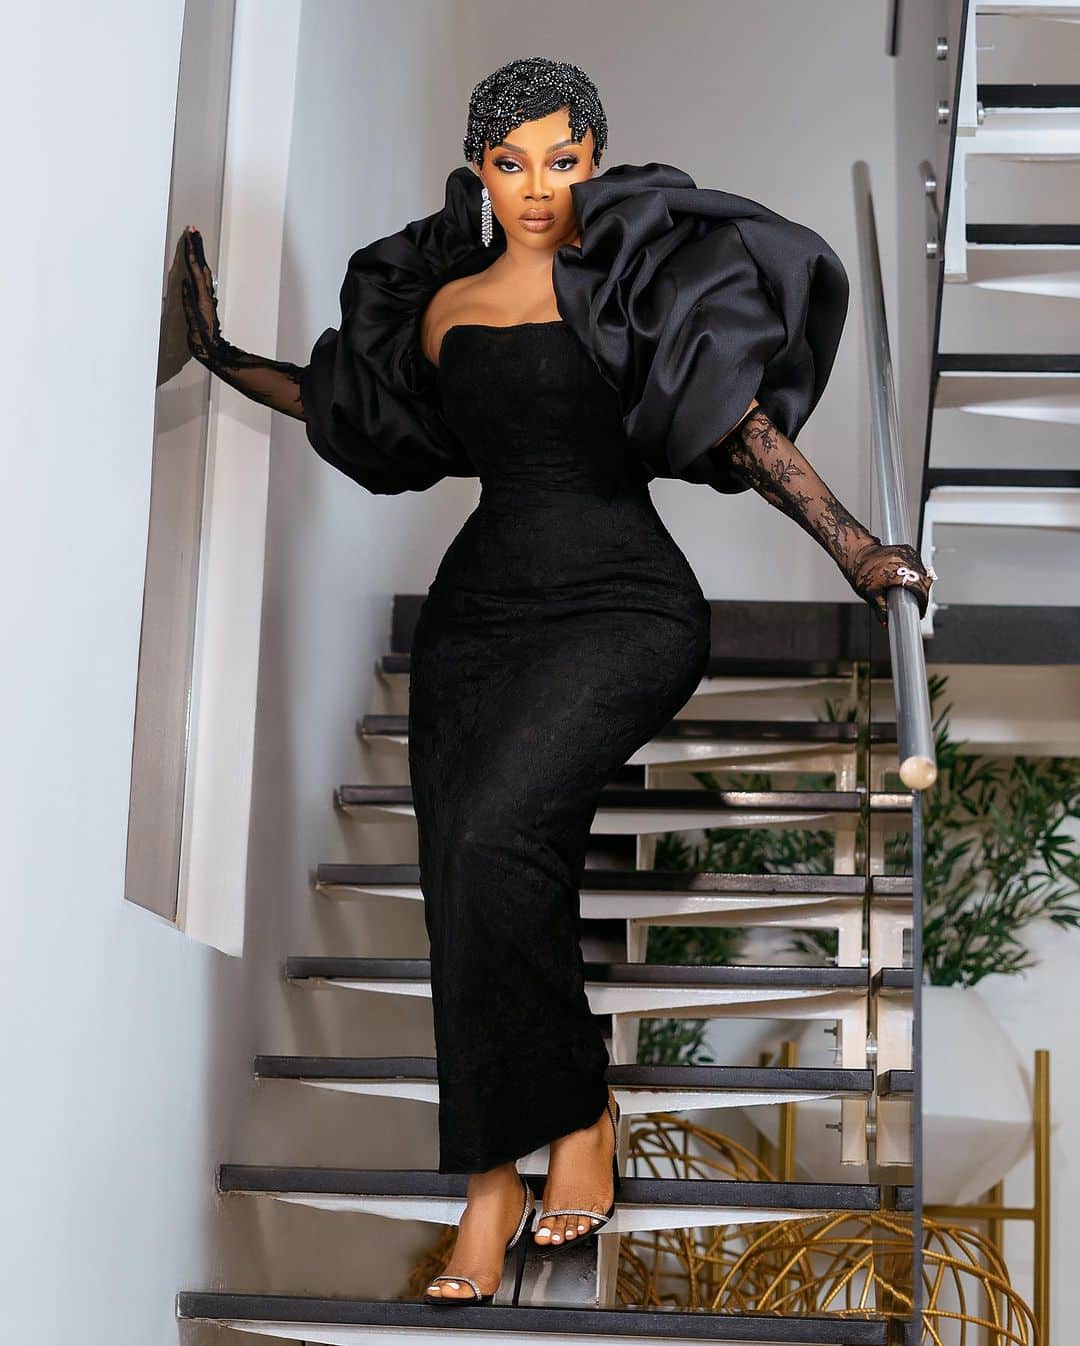 Don’t demand what you can’t afford from men – Toke Makinwa tells ladies